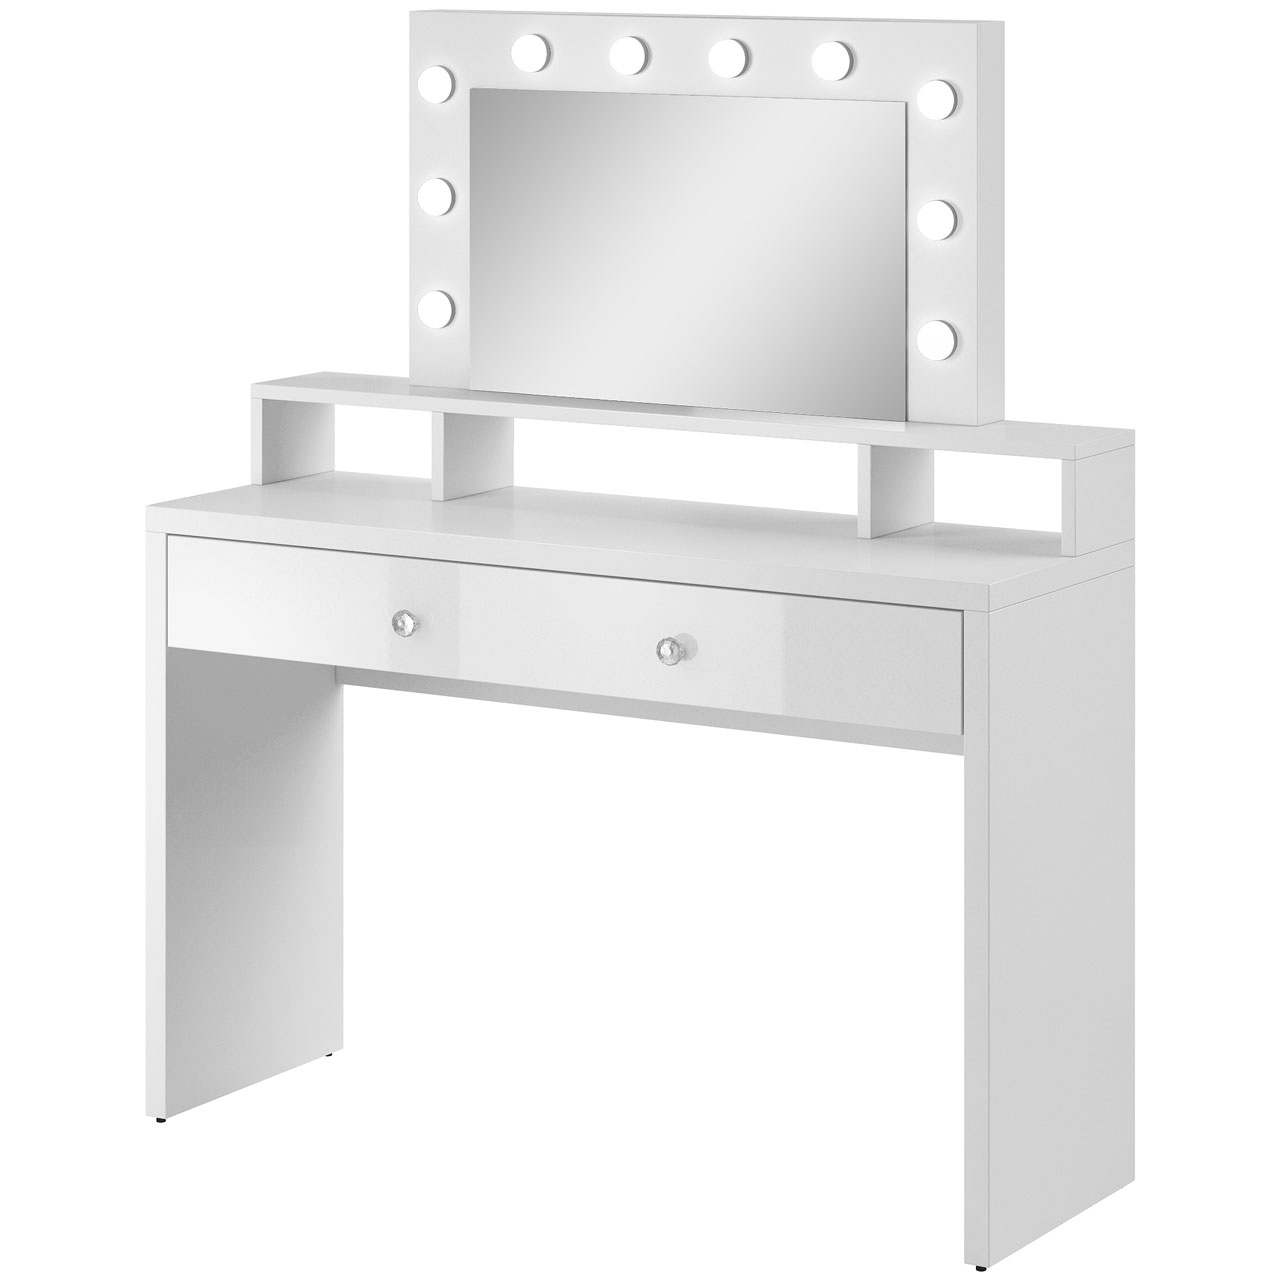 Dressing table with mirror and lighting ARIA white / white gloss